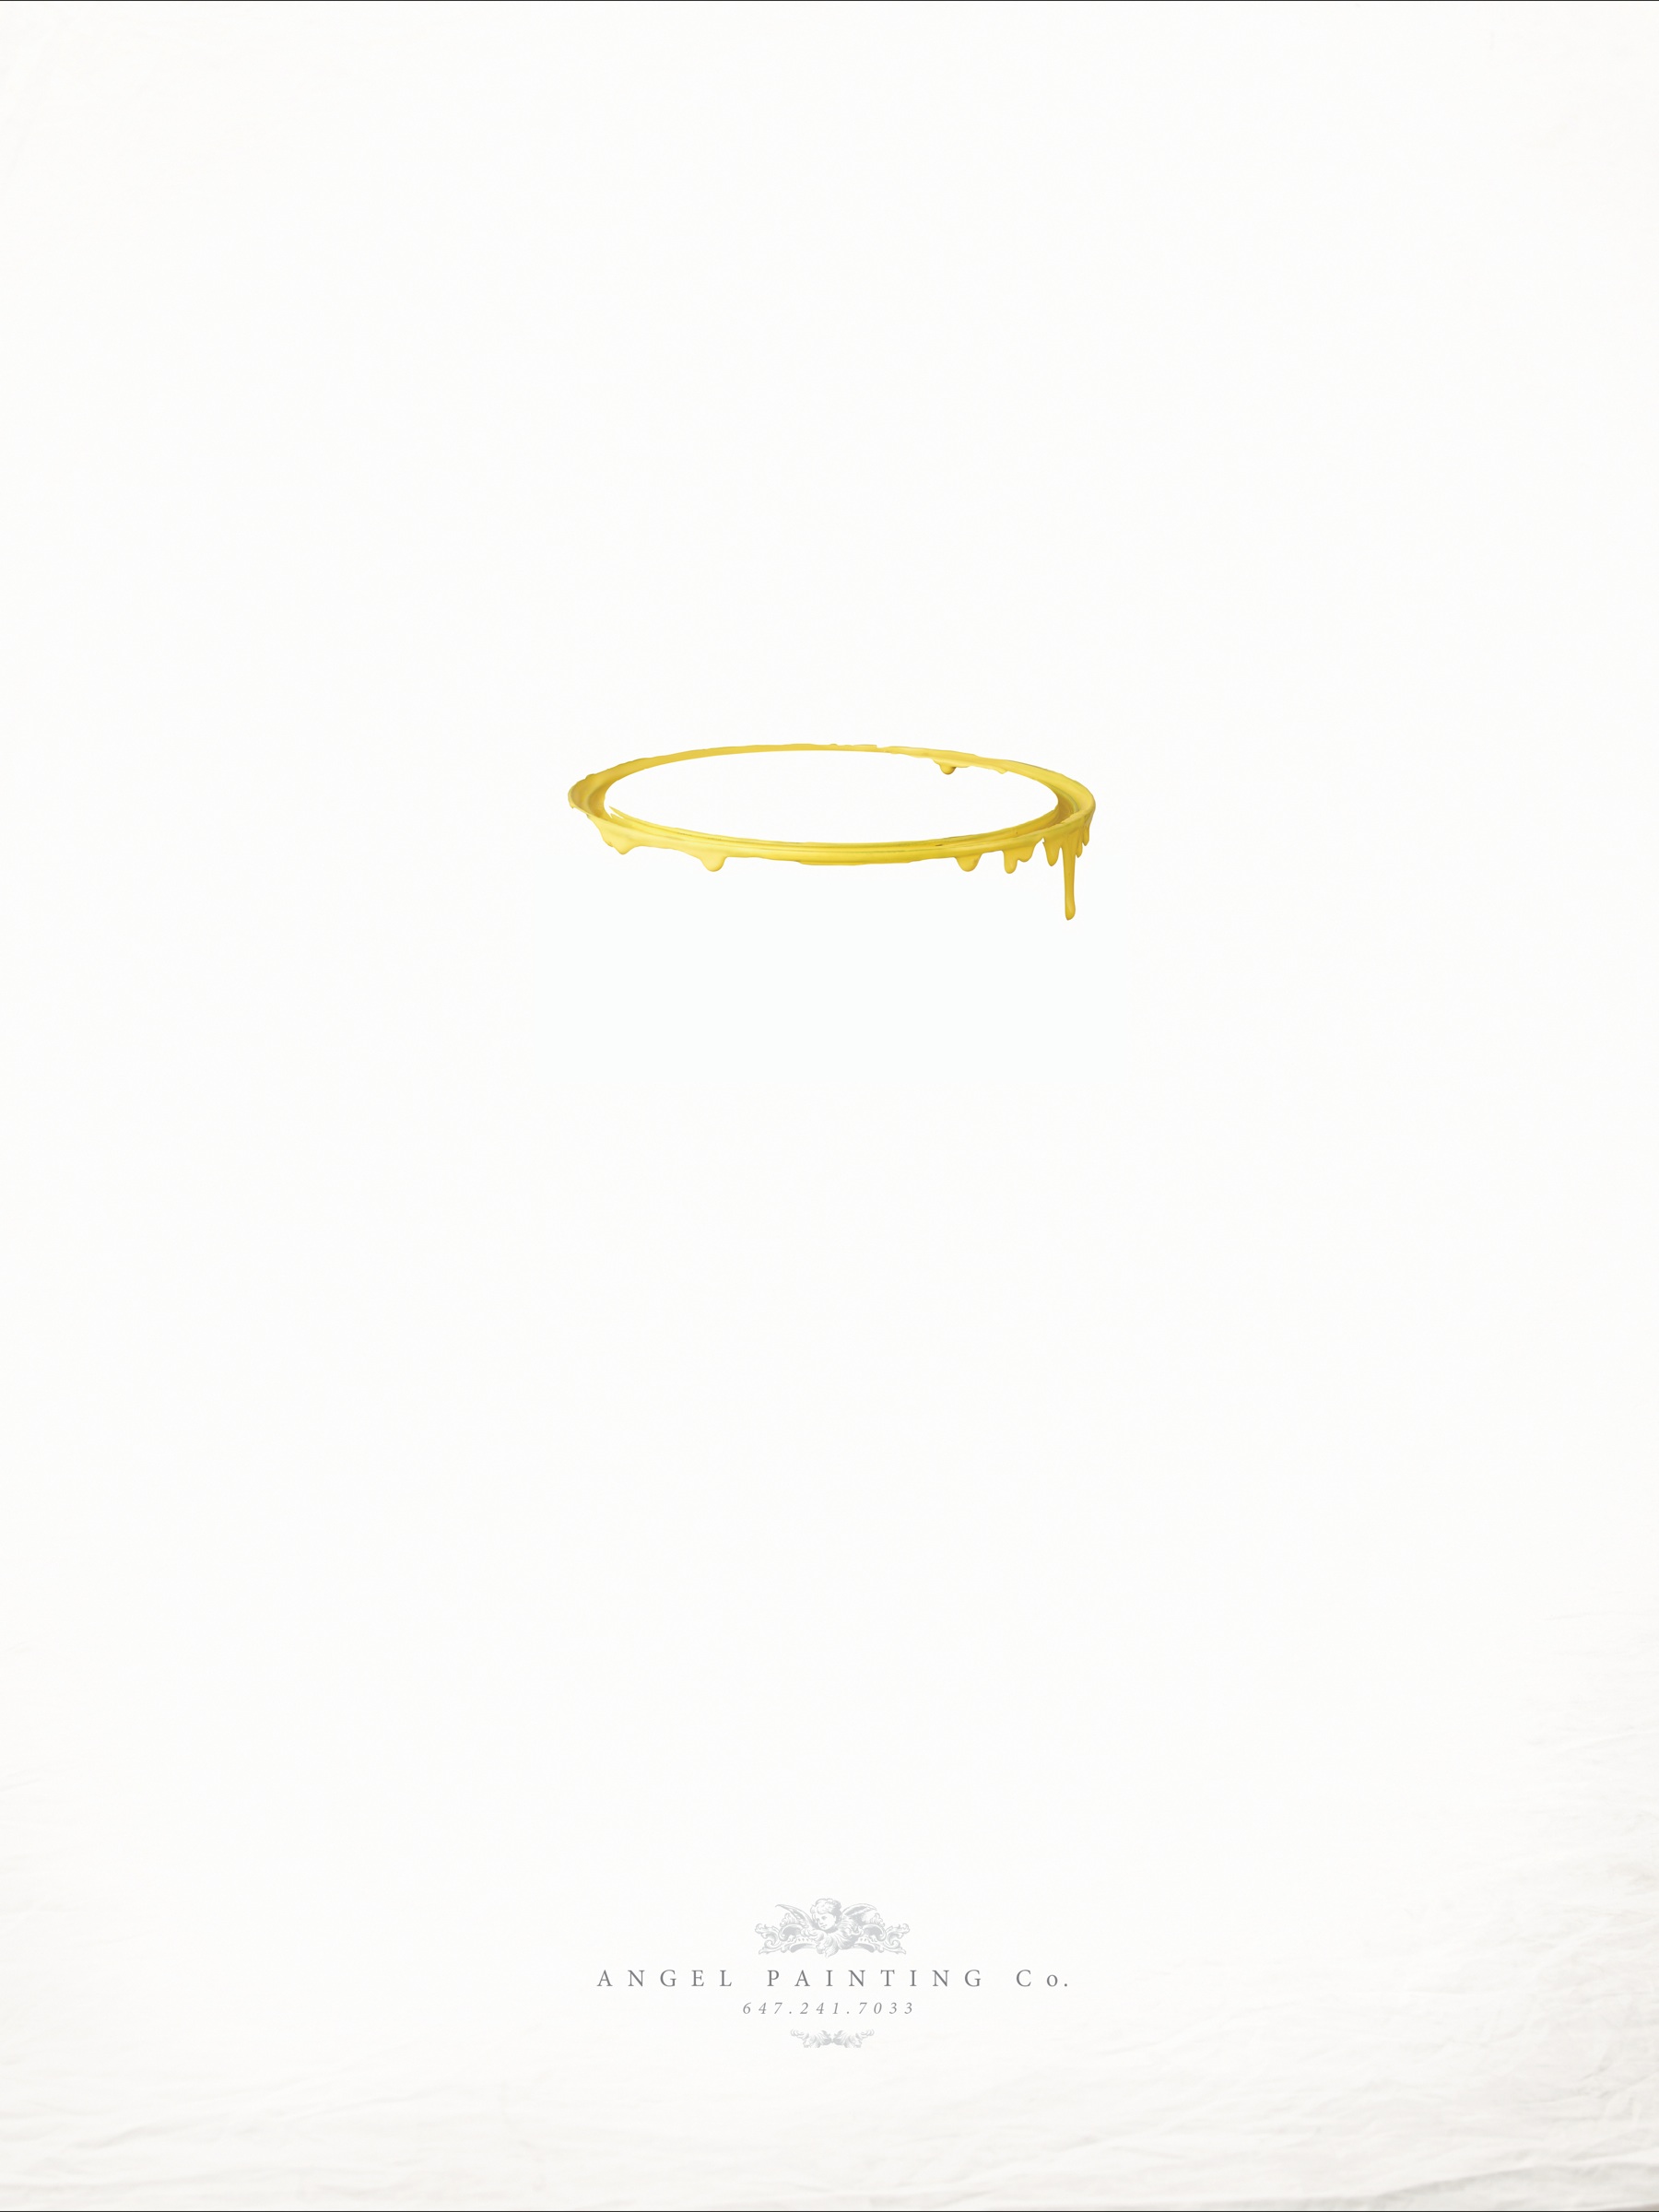 Angel Painting Co.: Halo | Ads of the World�